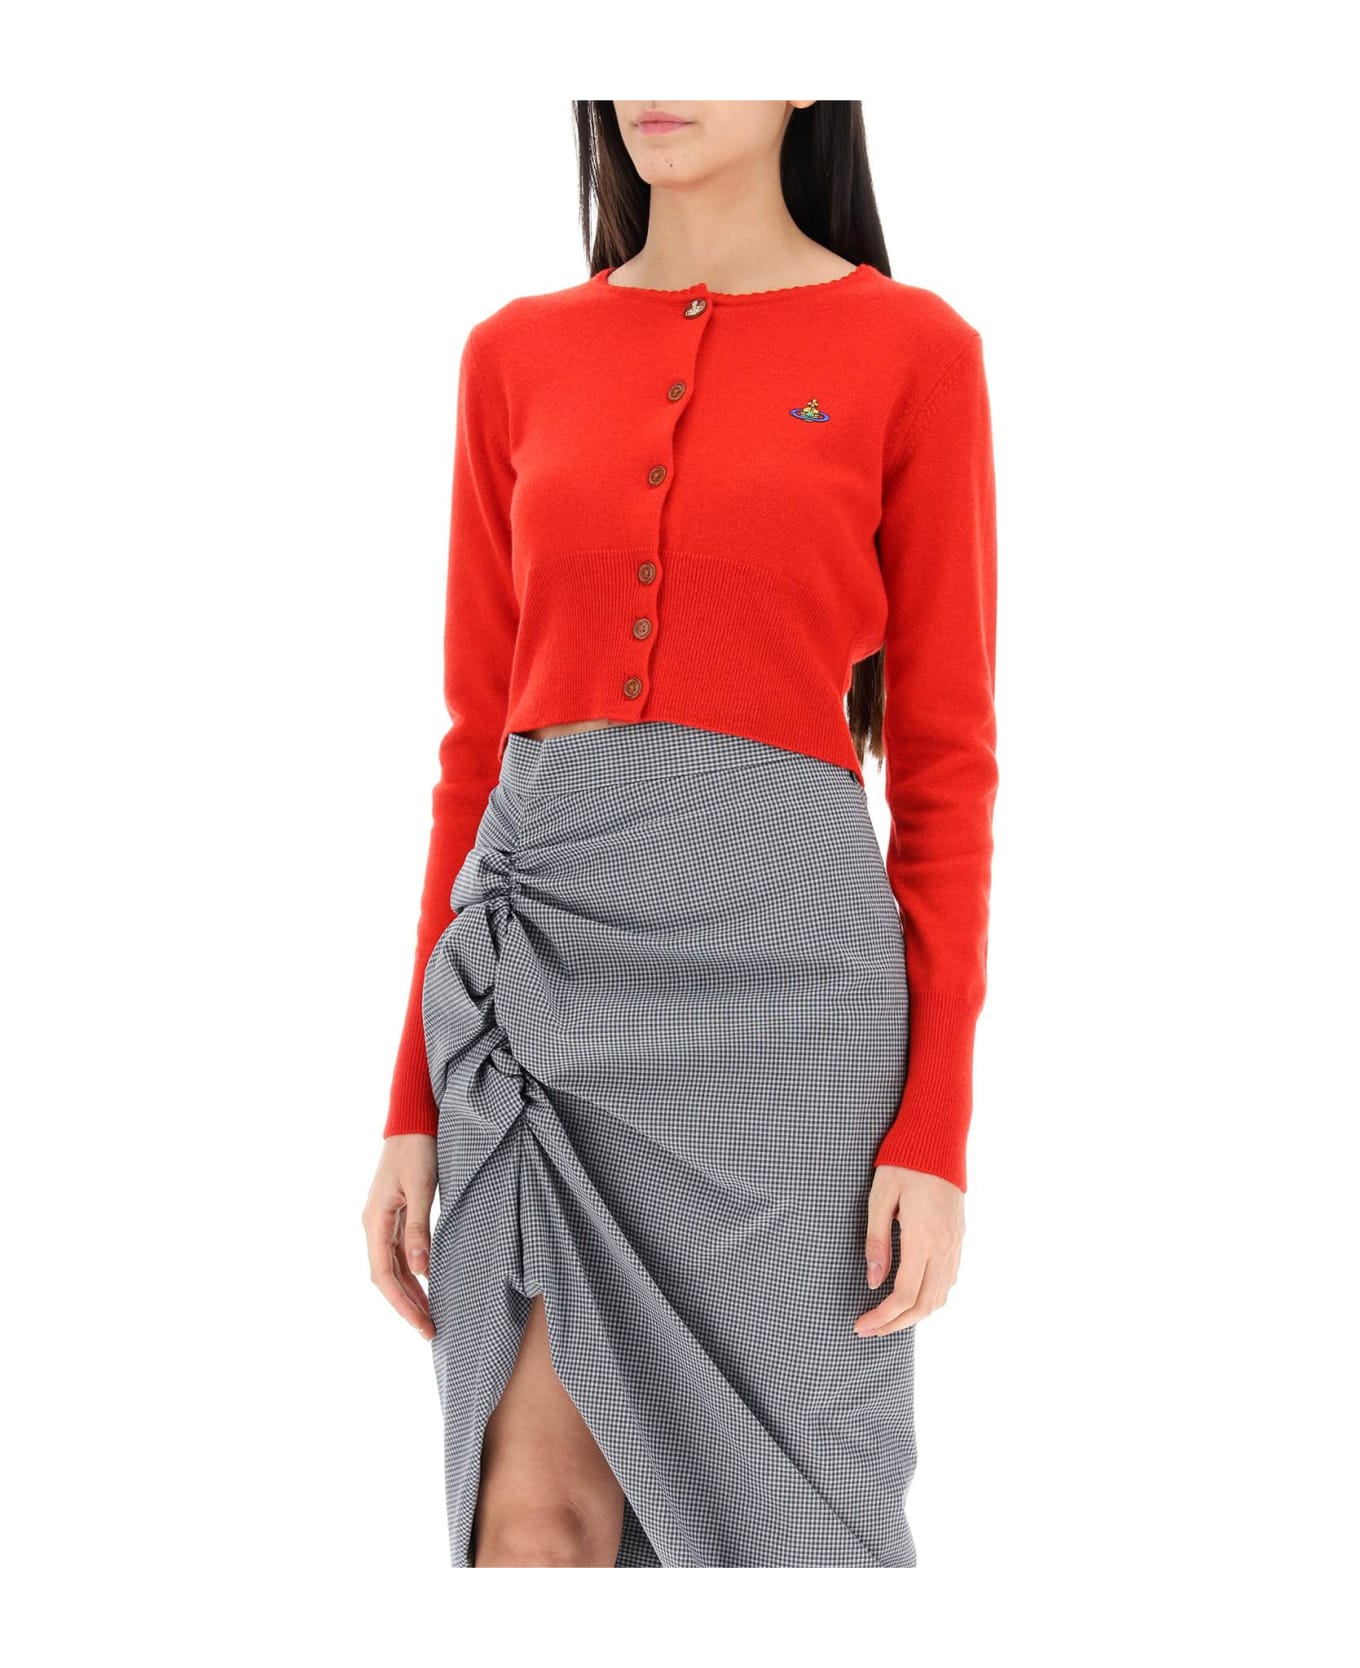 Vivienne Westwood Bea Cropped Cardigan - RED (Red)